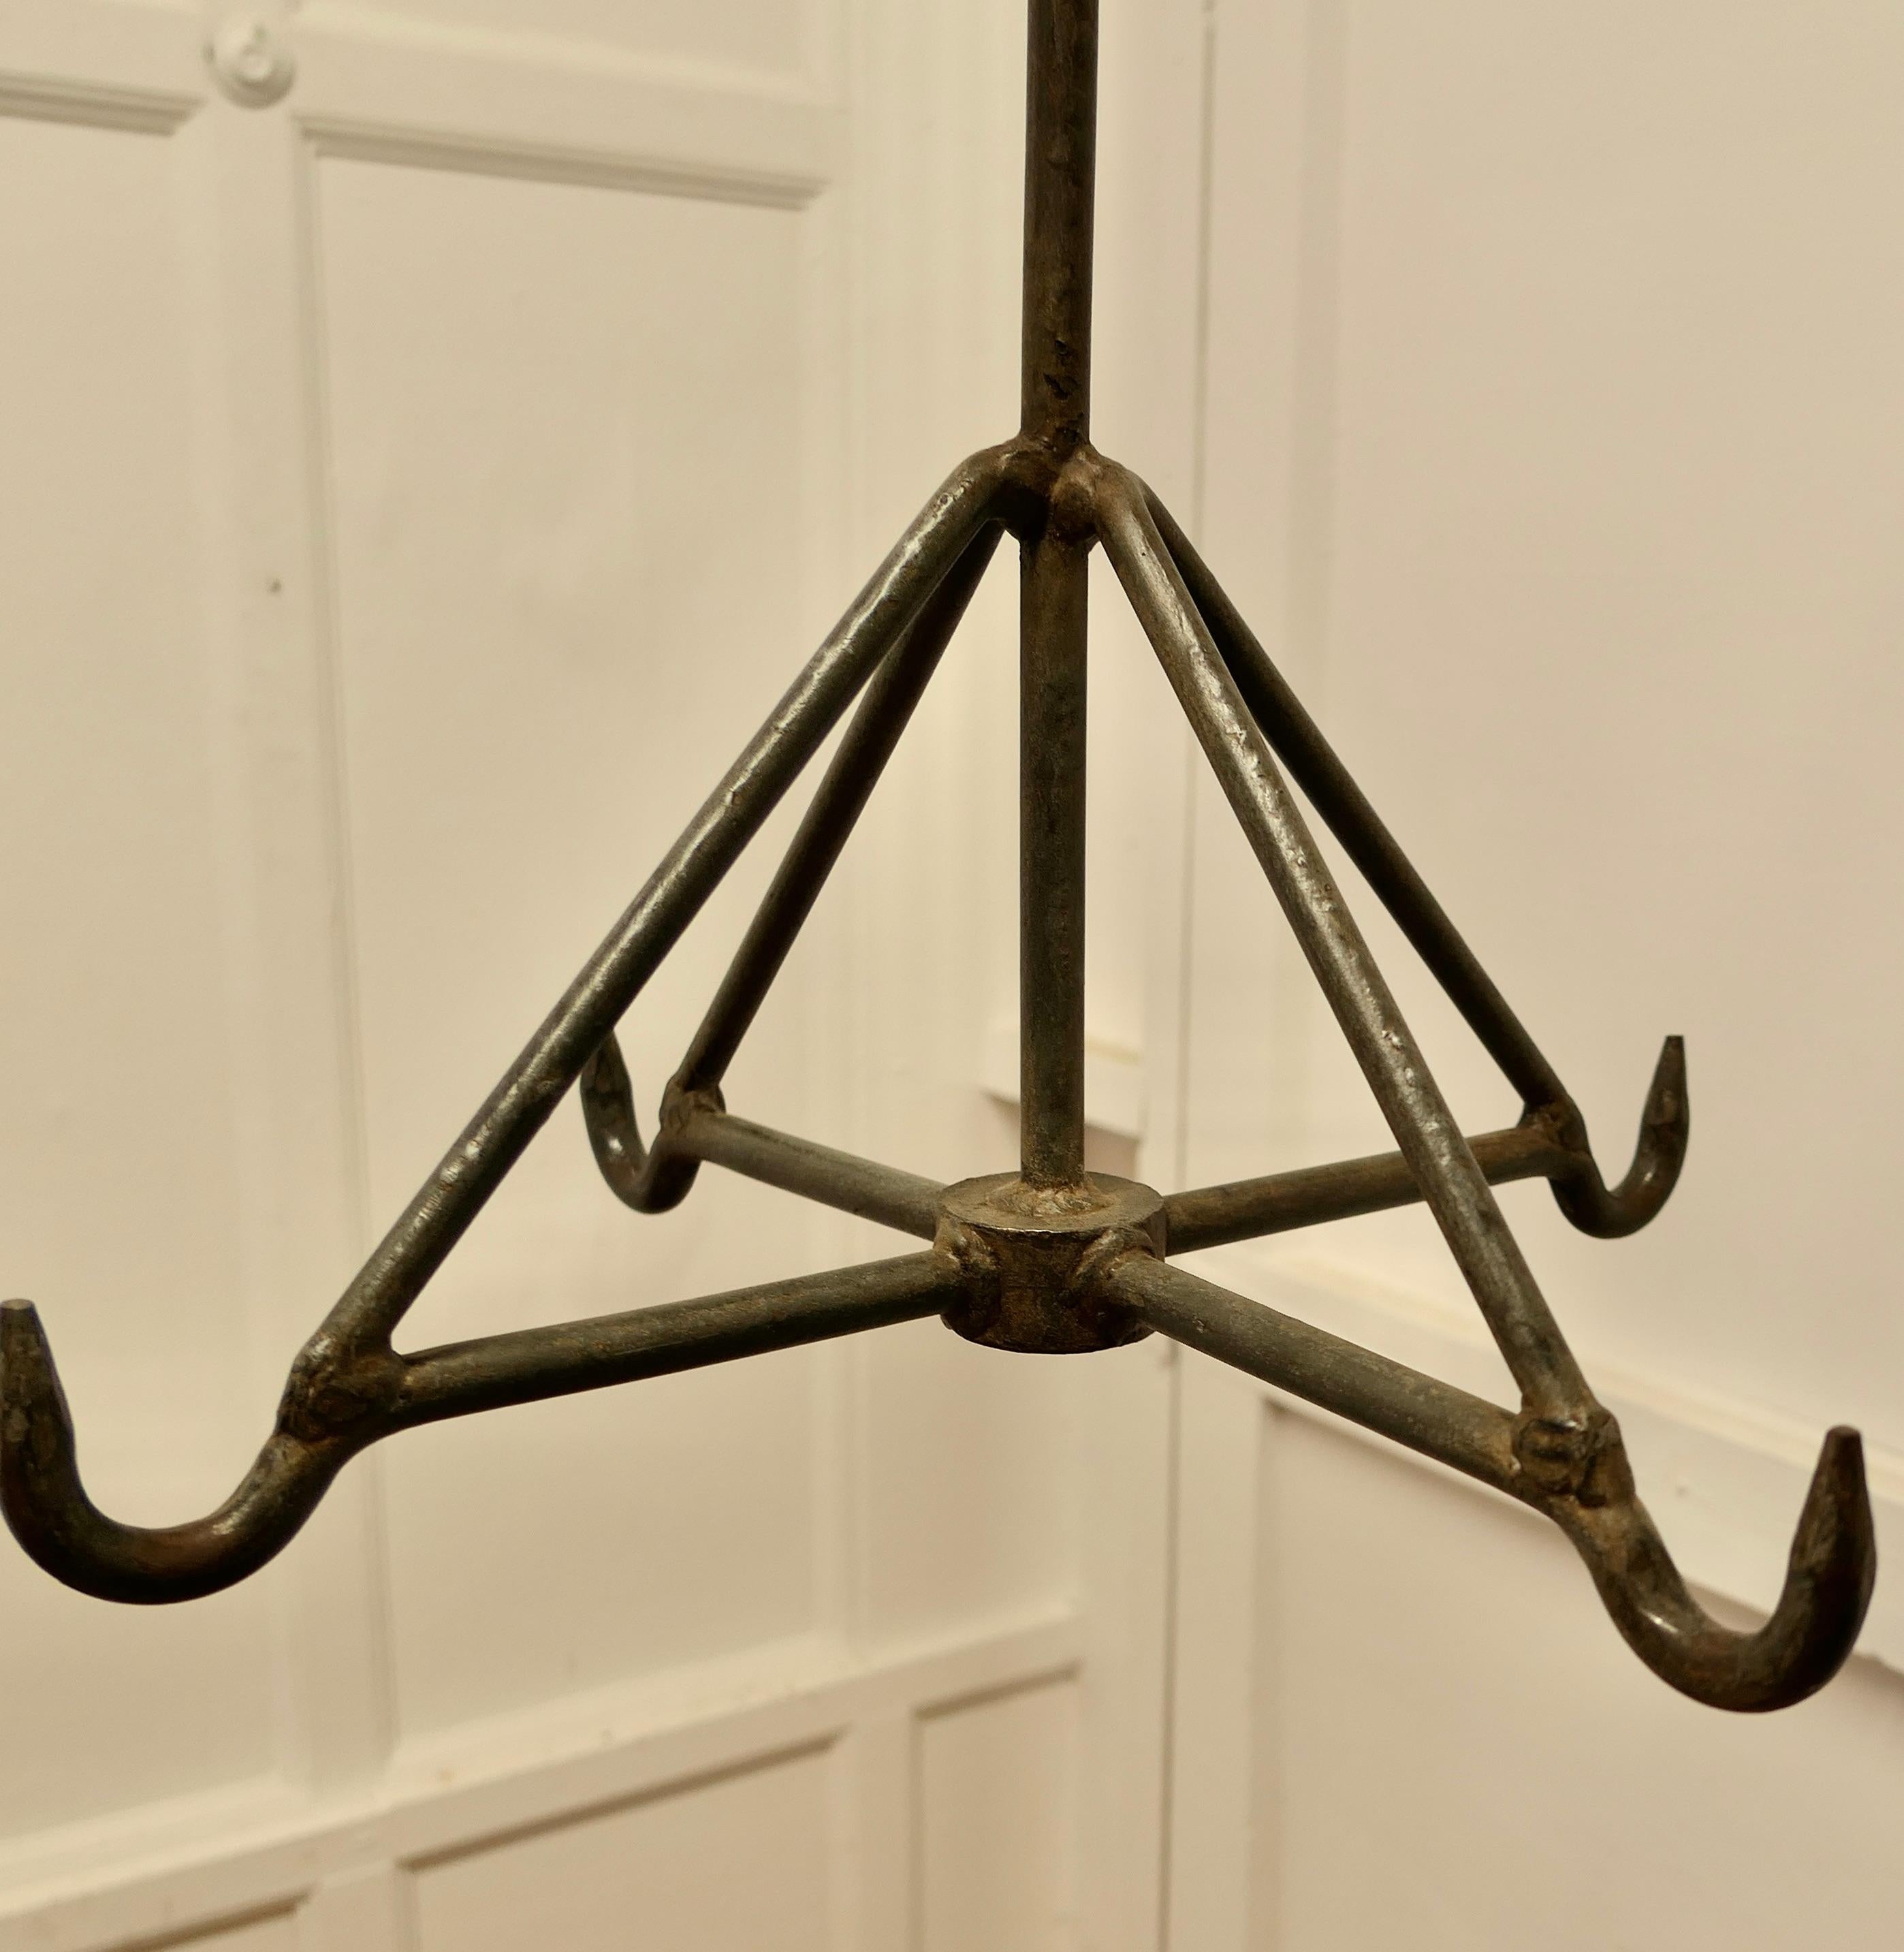  Blacksmith Made Iron Game Hanger, Kitchen Utensil or Pot Hanger   In Good Condition For Sale In Chillerton, Isle of Wight